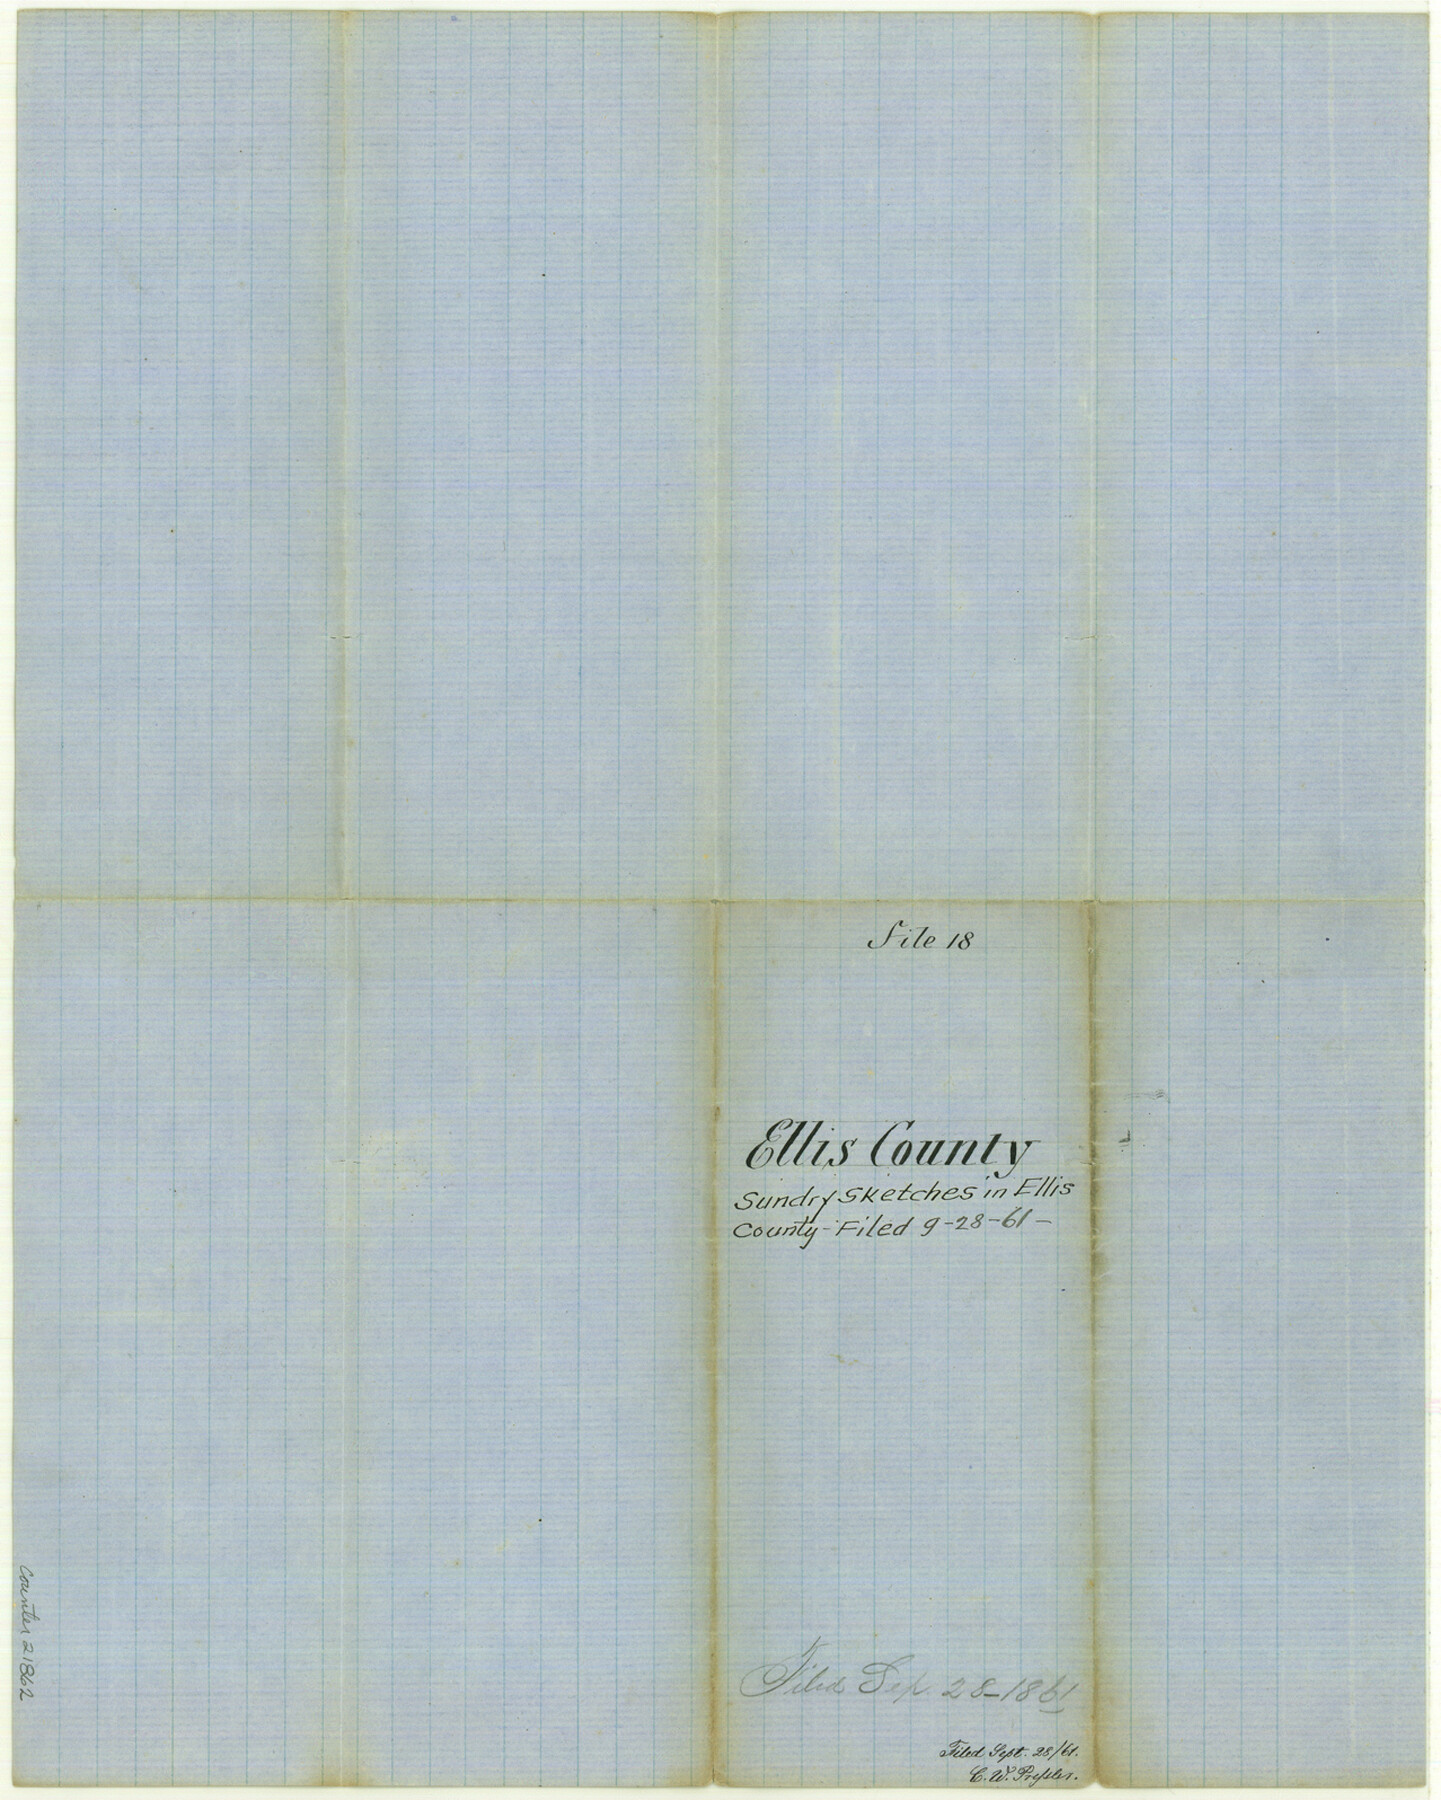 21862, Ellis County Sketch File 18, General Map Collection